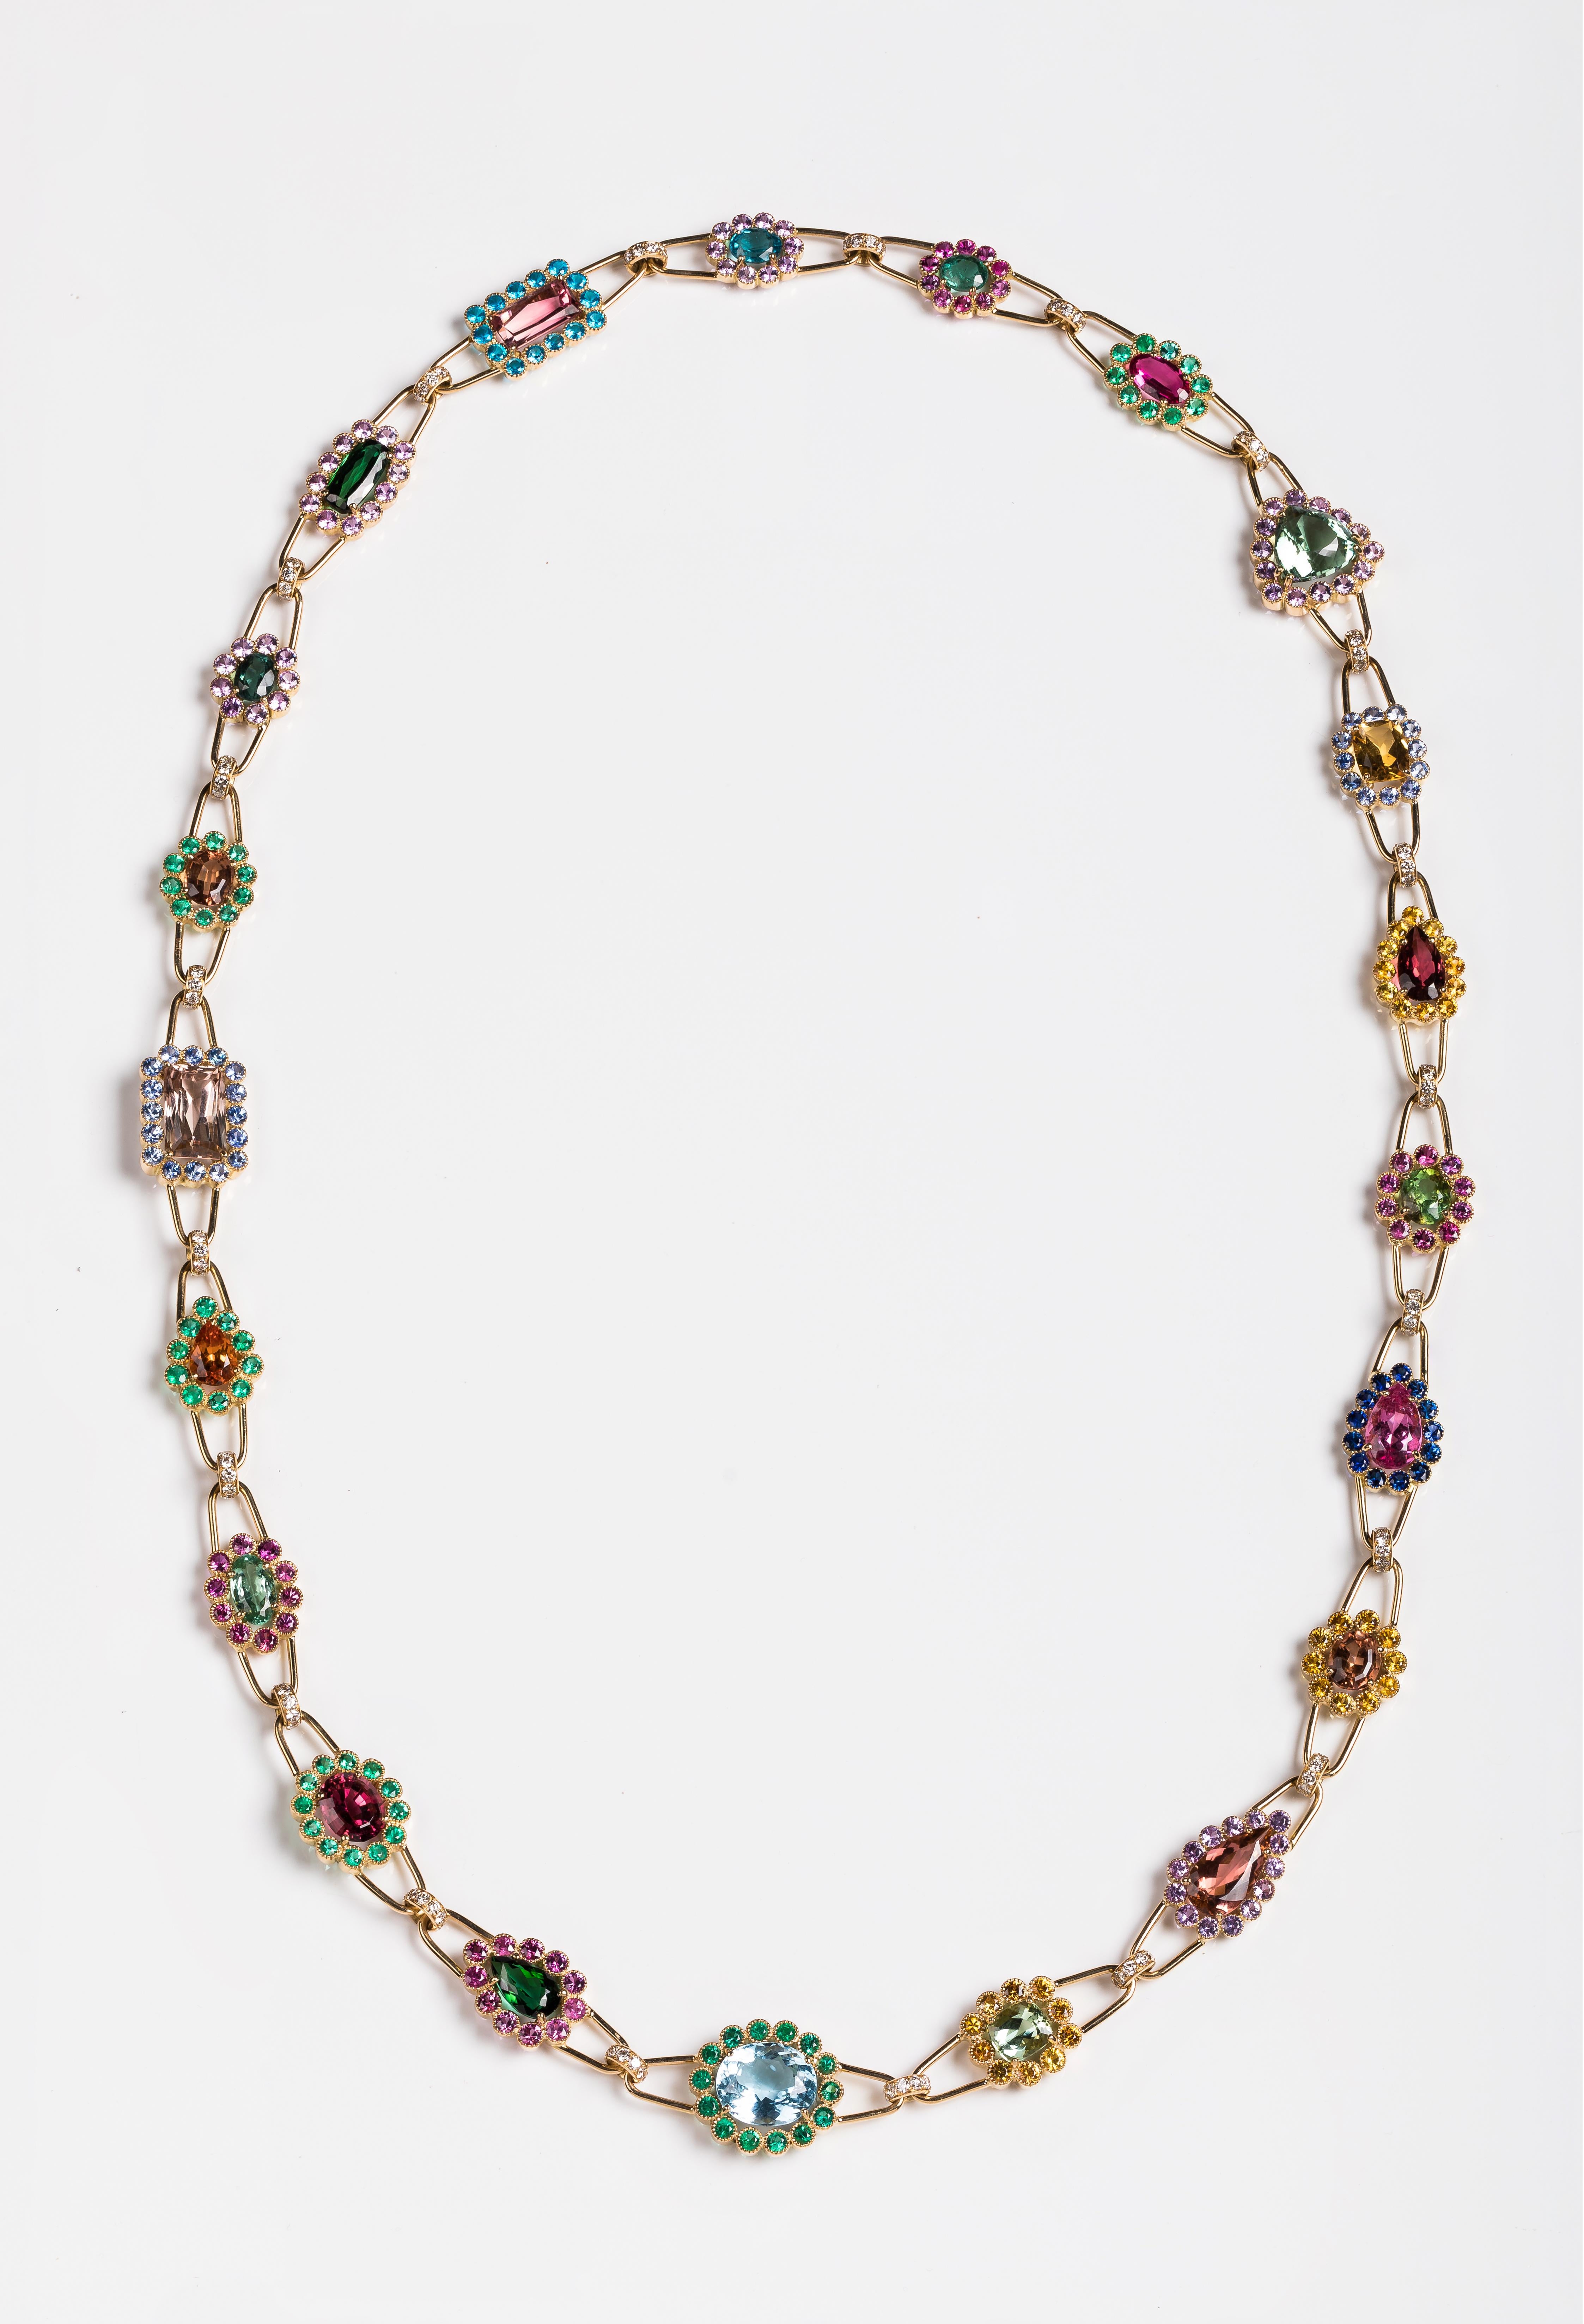 Rosior by Manuel Rosas Contemporary Link Necklace with 80 cm ( 31.5